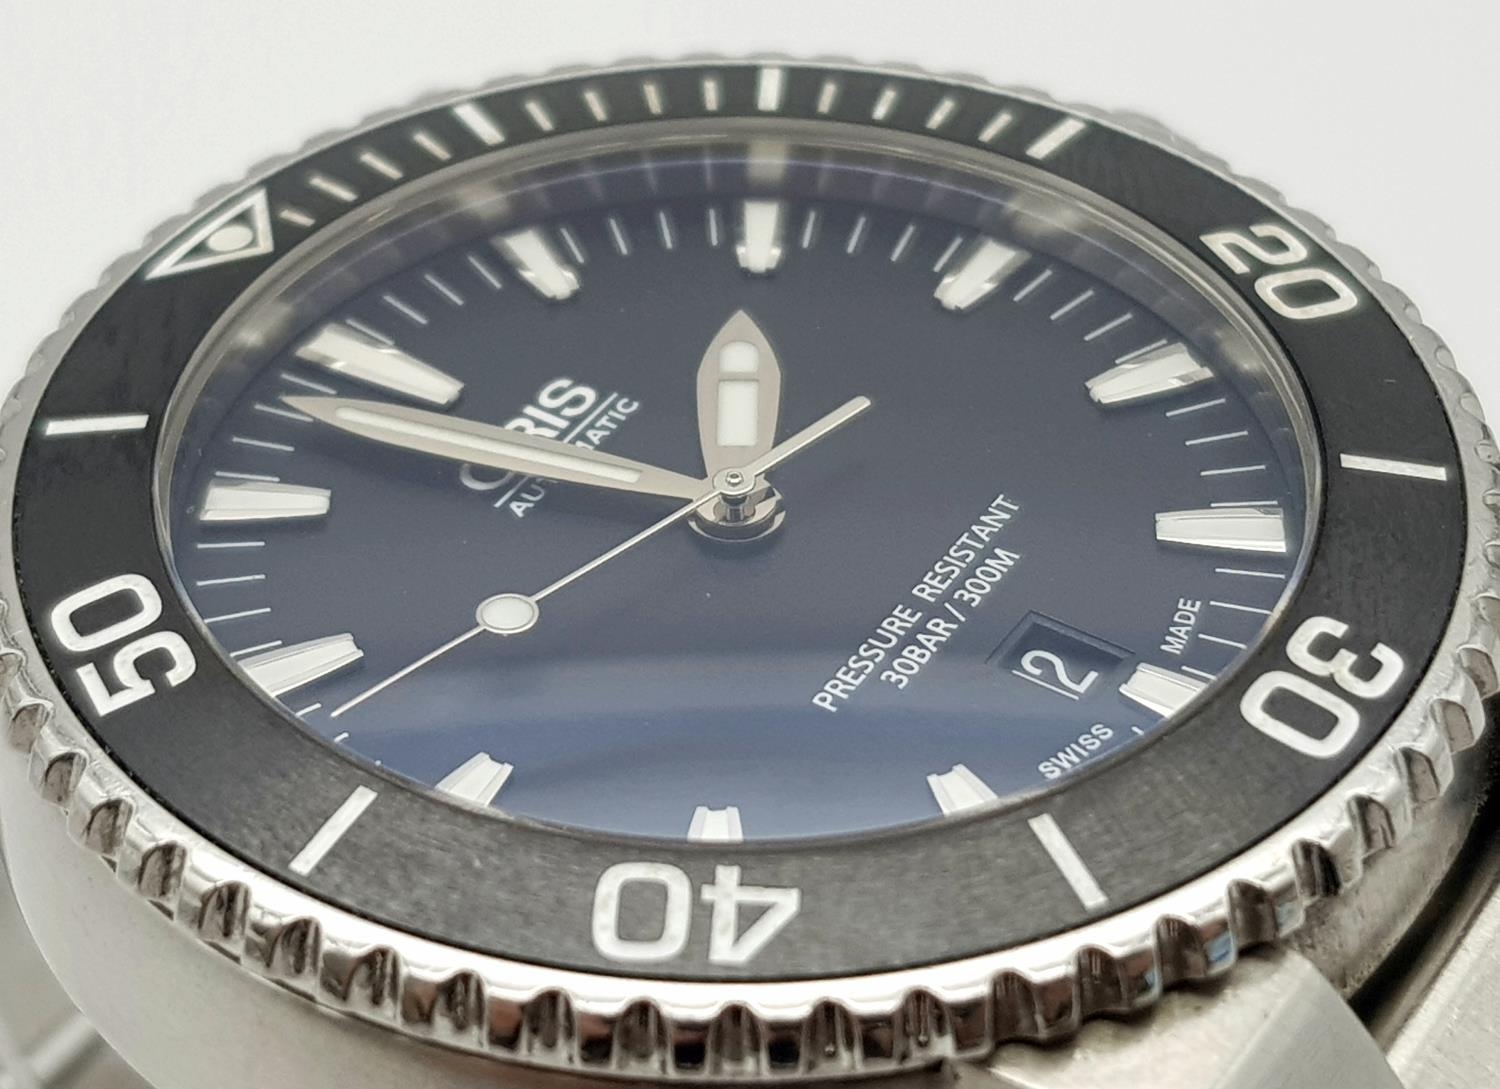 An Oris Automatic Divers Watch. Pressure resistant to 300M - Model 7653. Stainless steel bracelet - Image 3 of 8